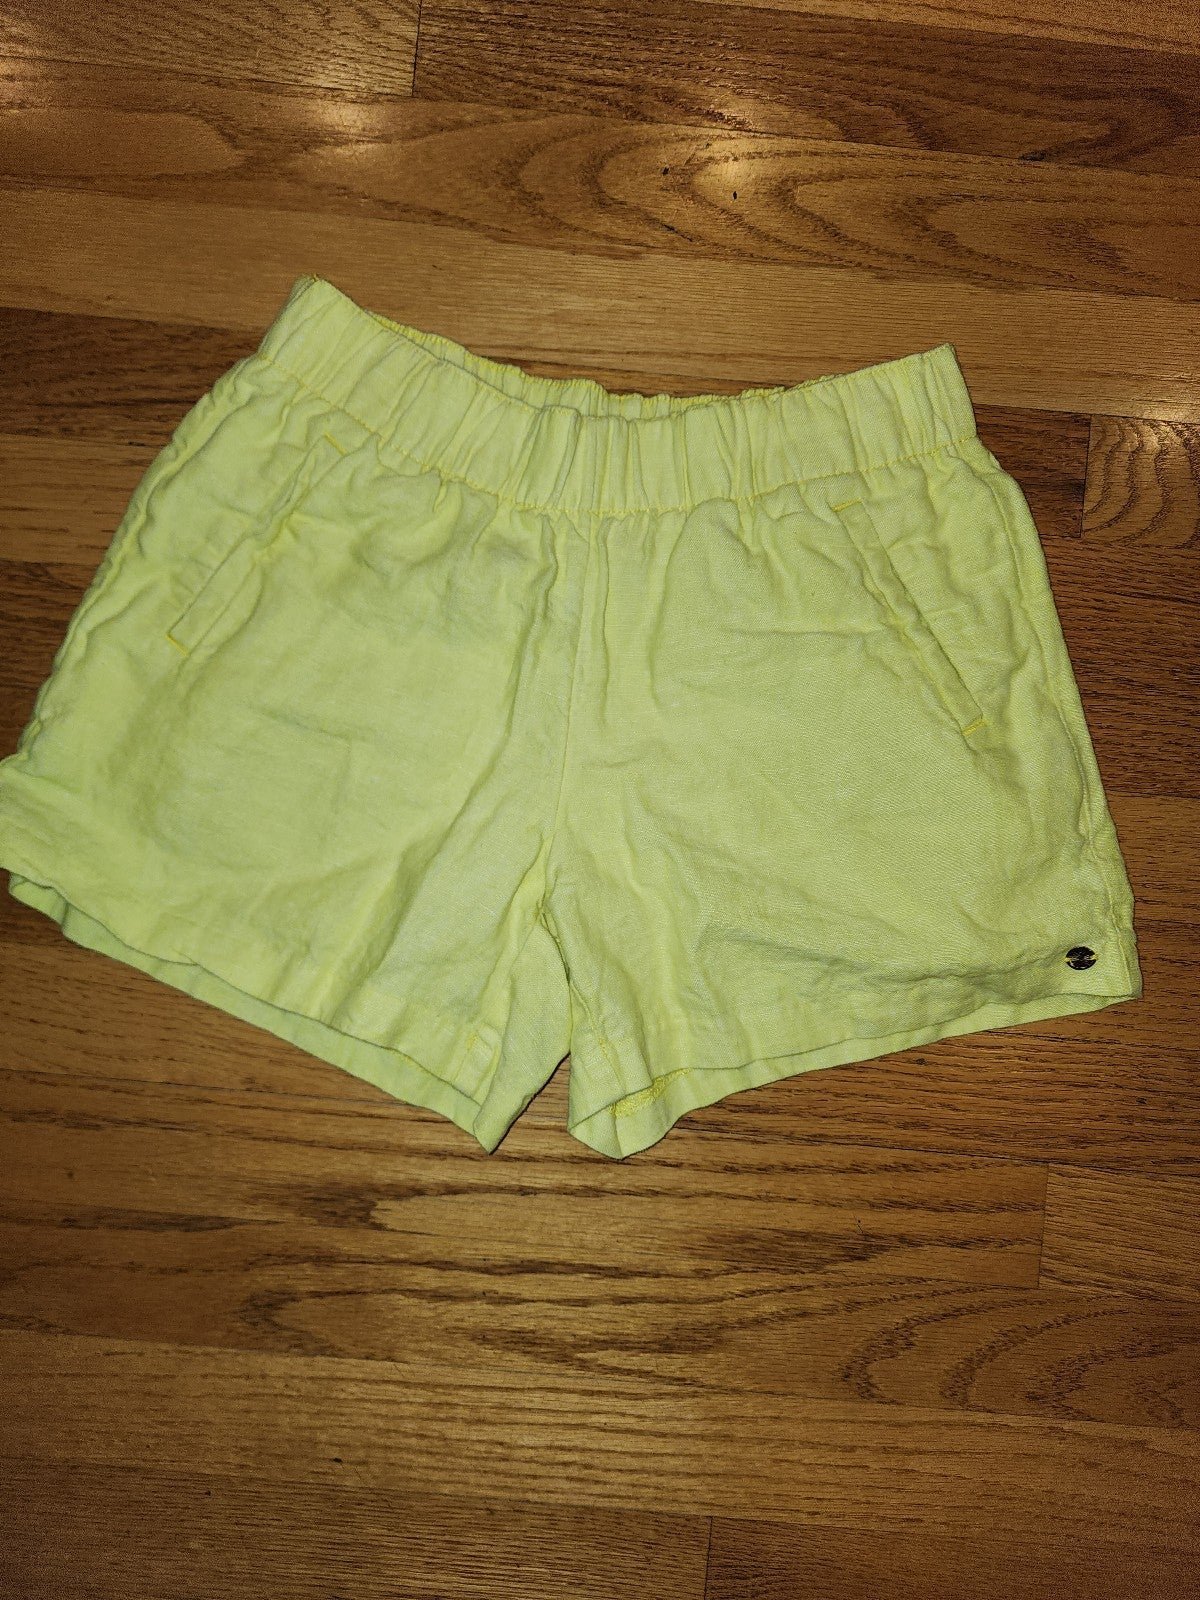 floor price Lilly Pulitzer Yellow Shorts Womens sz XS l